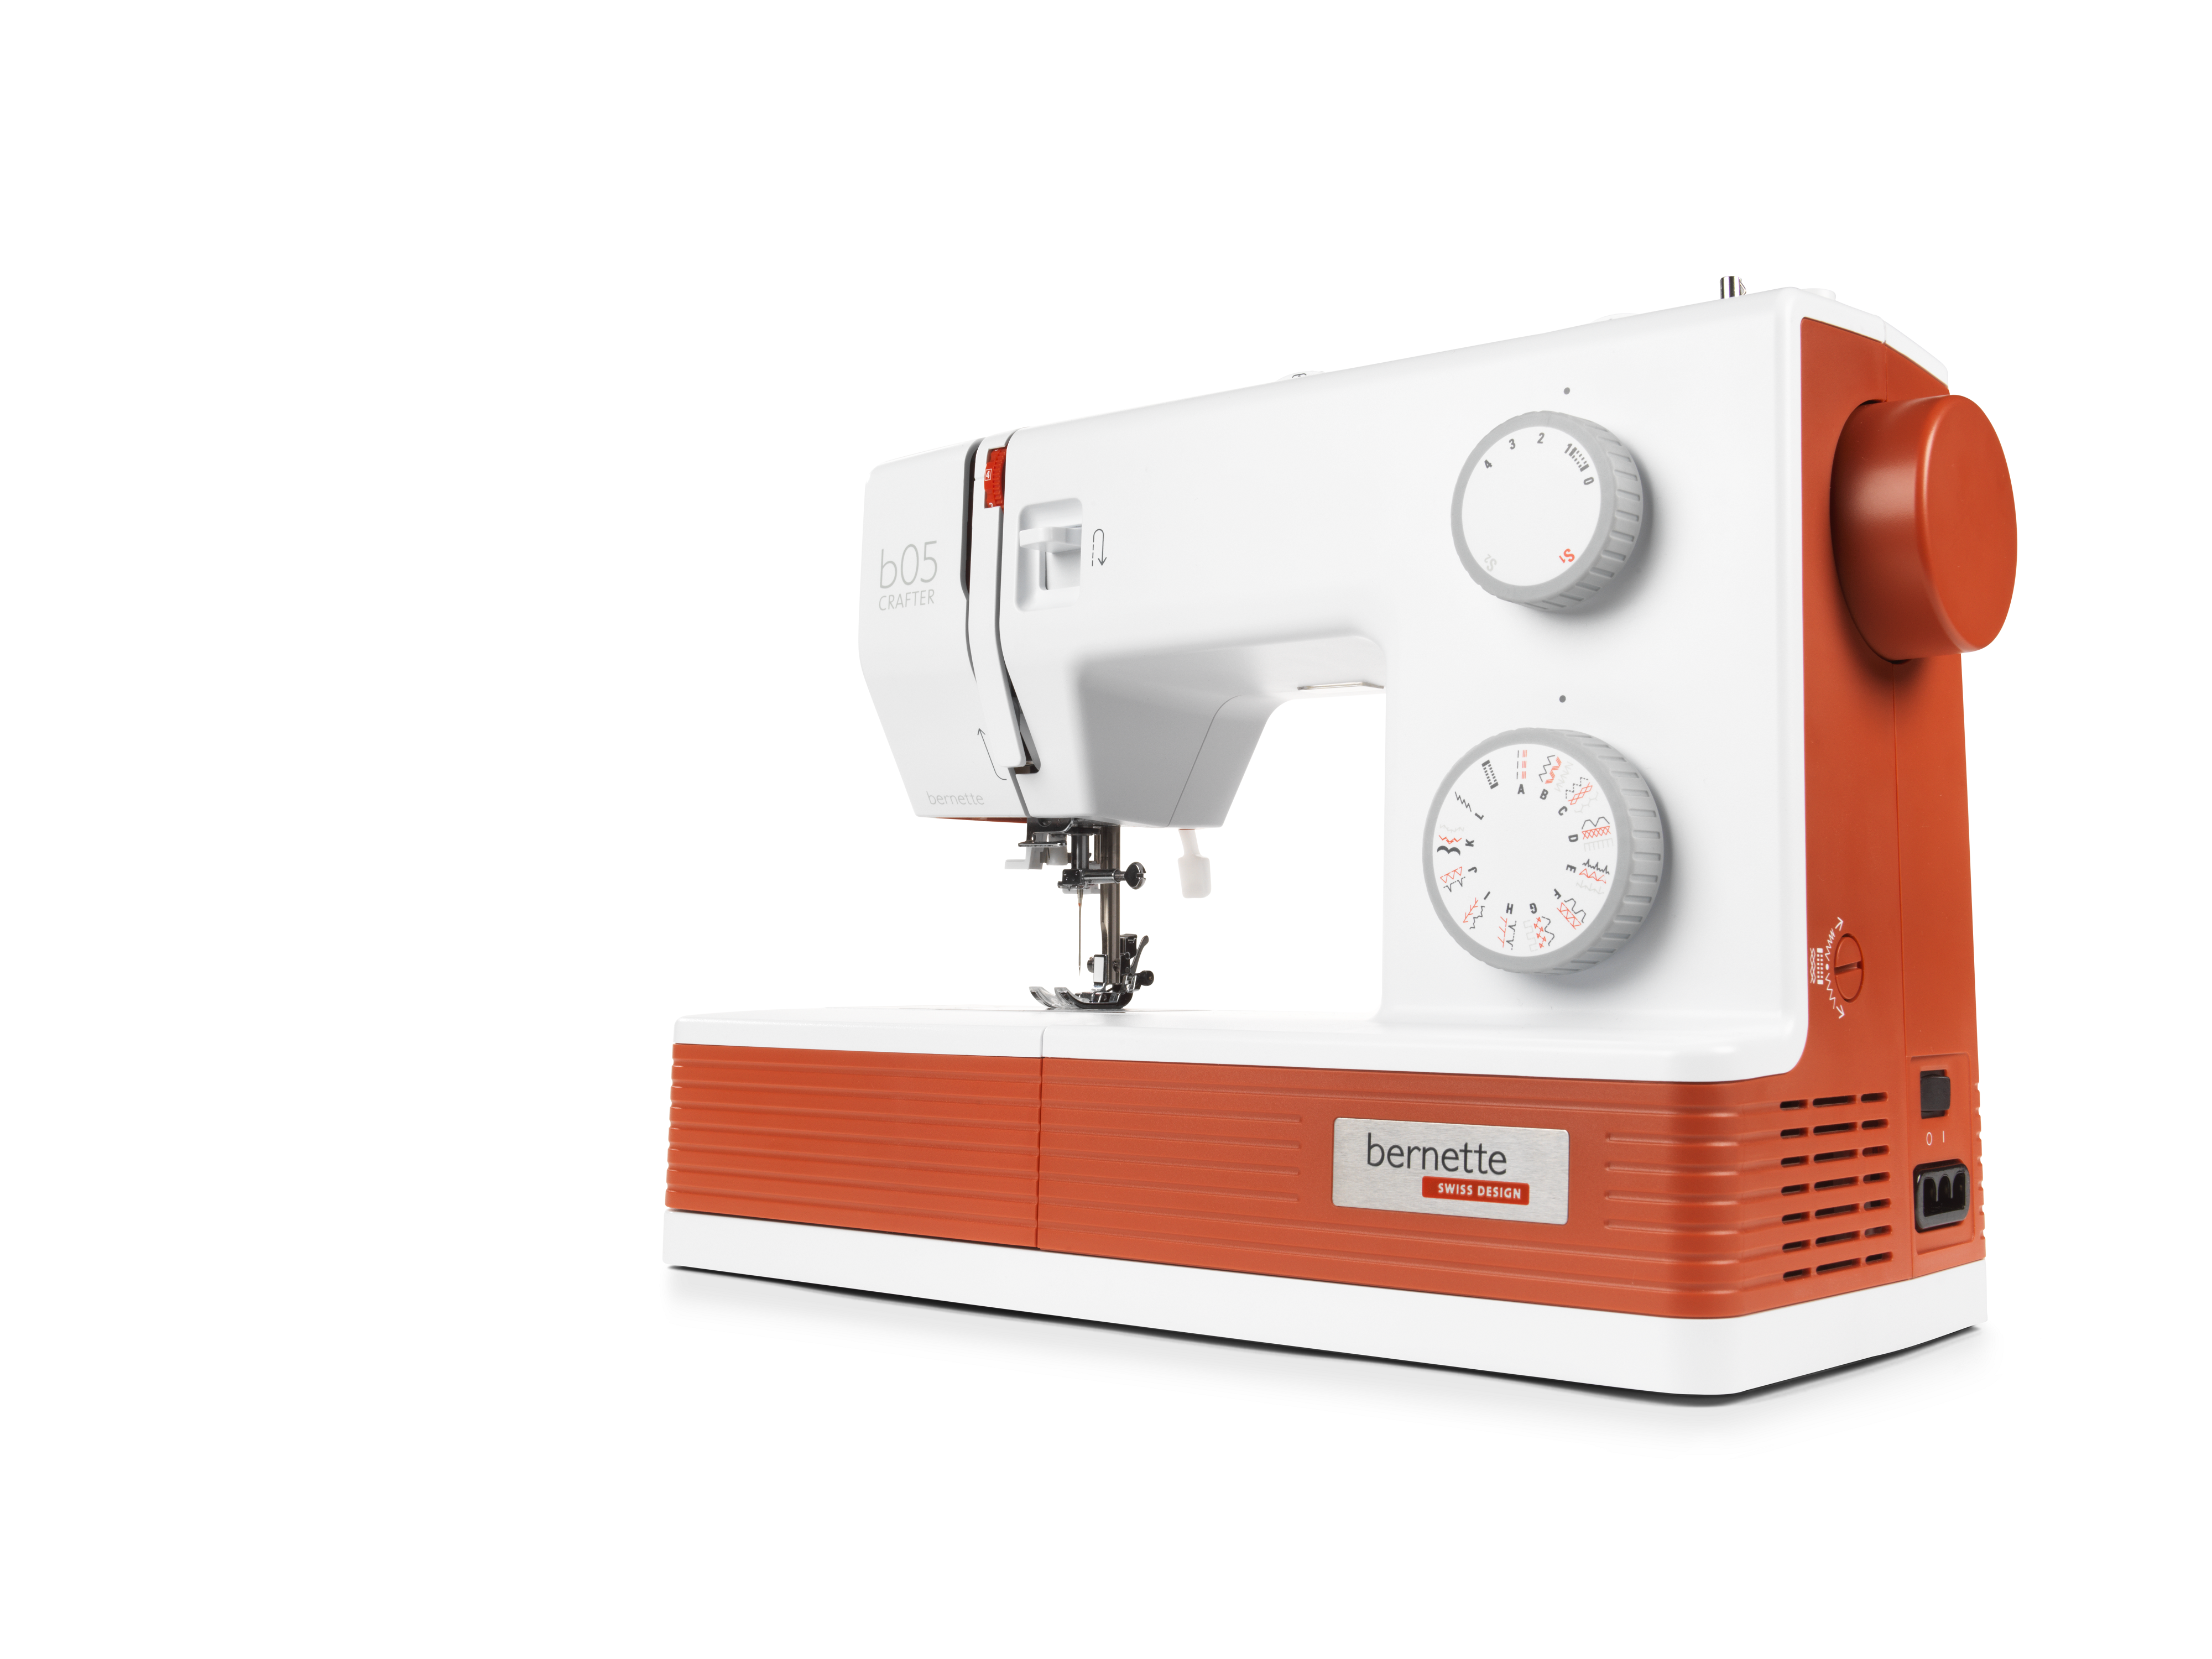 Bernette b05 Crafter Sewing Machine for Sale at World Weidner